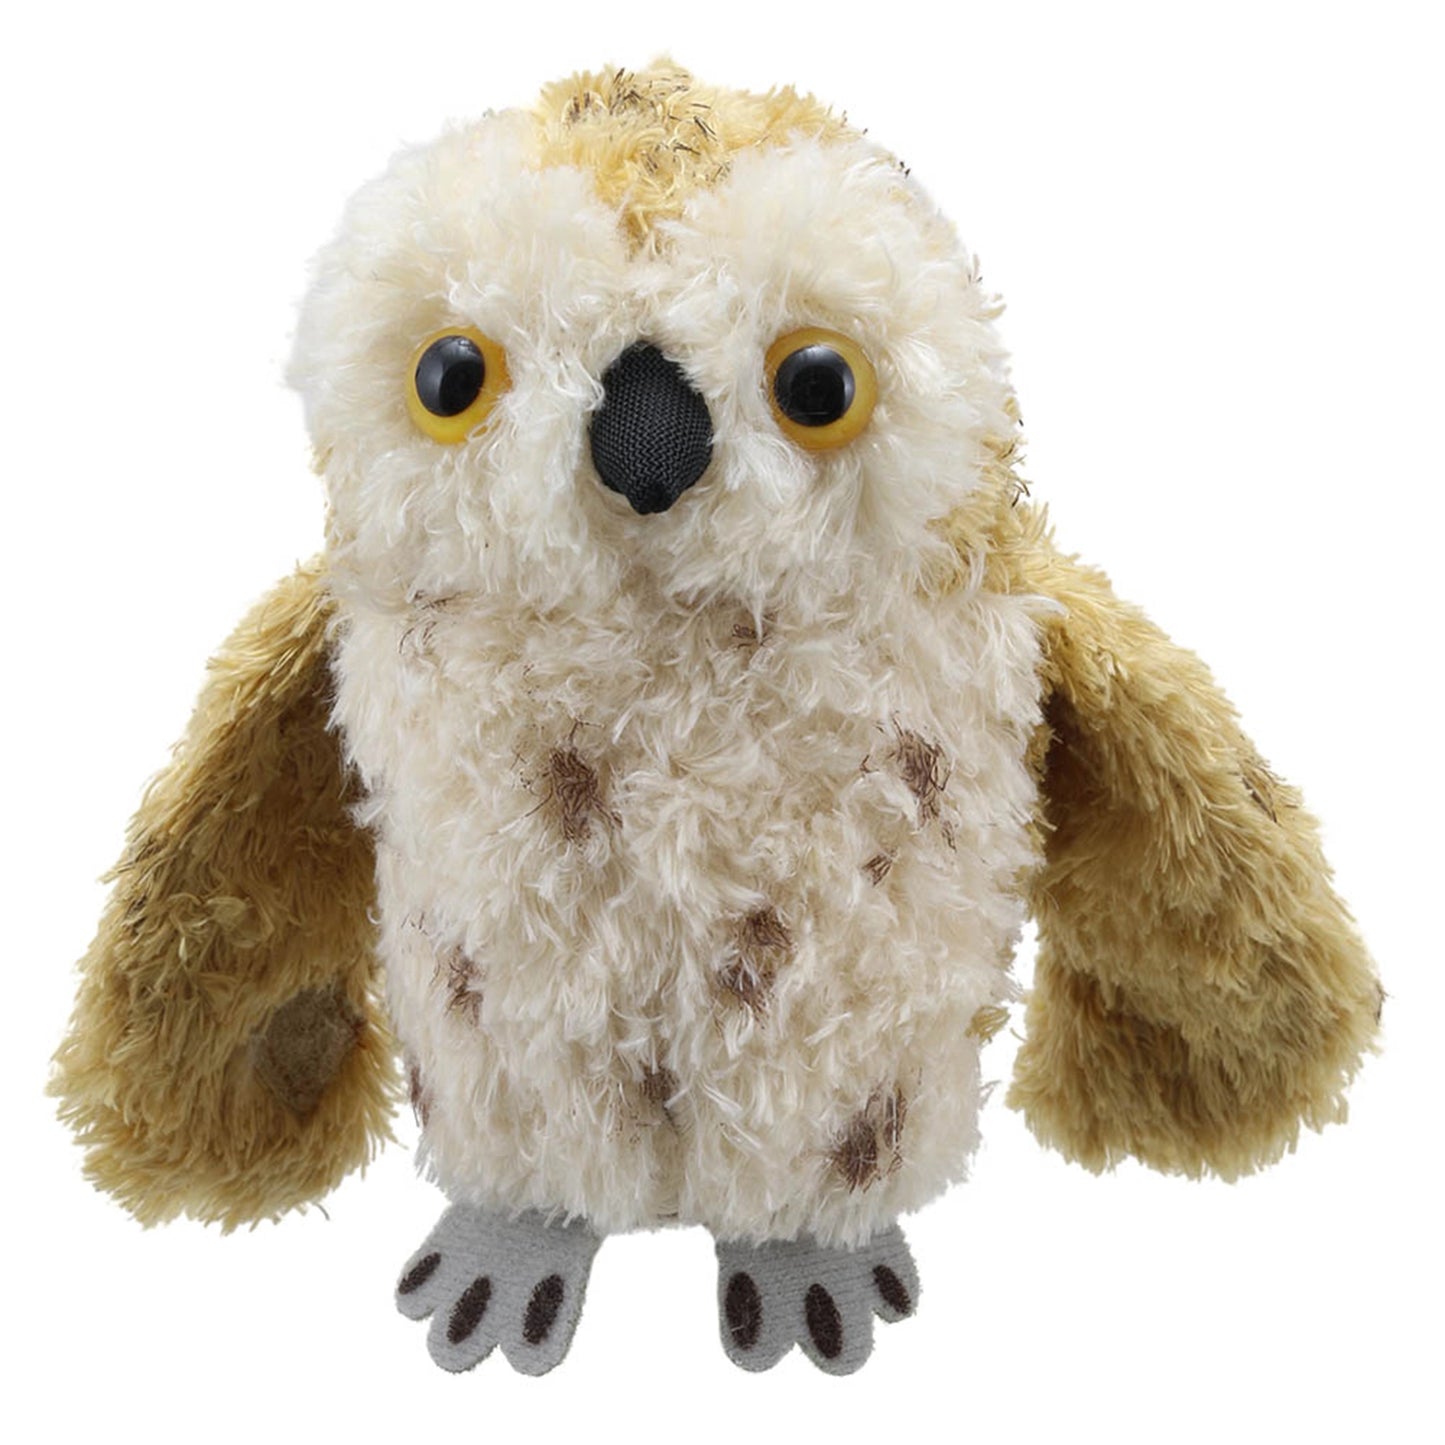 Owl (Tawny) Finger Puppet - The Puppet Company - The Forgotten Toy Shop